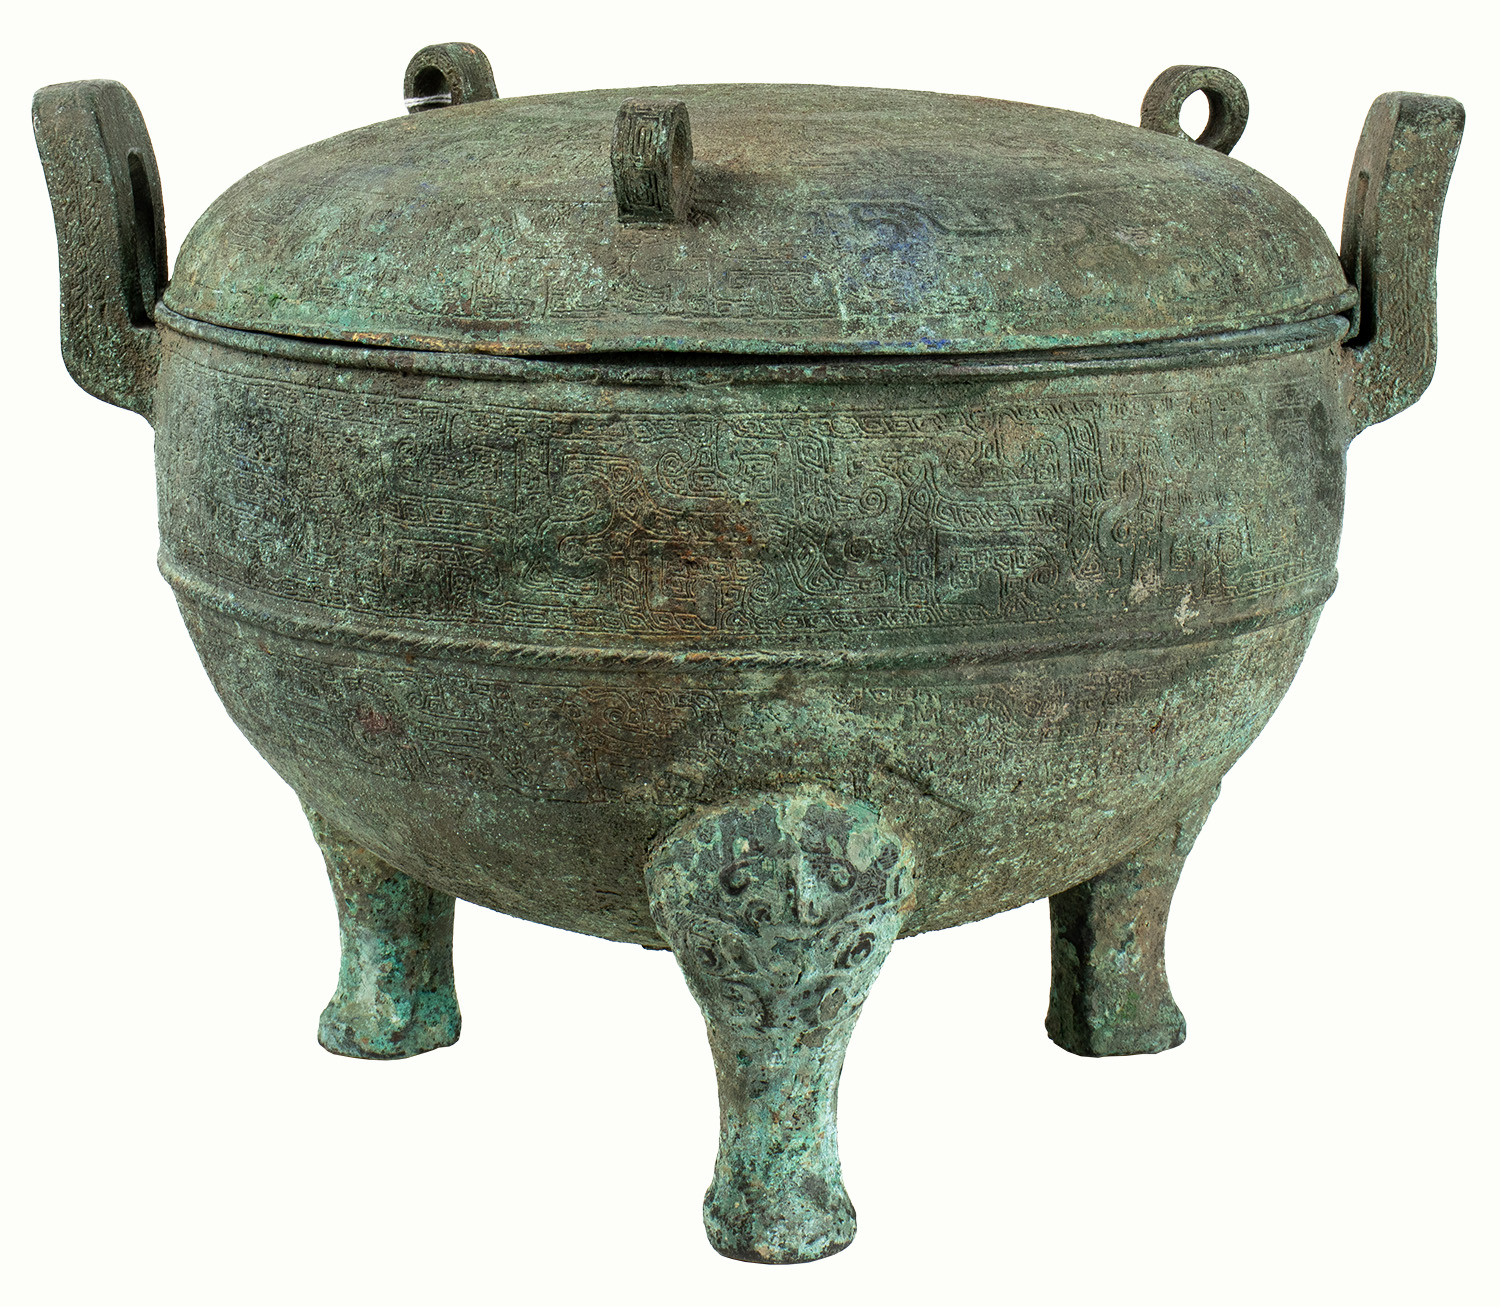 Chinese Han Dynasty Cast Bronze Covered Ding Vessel.